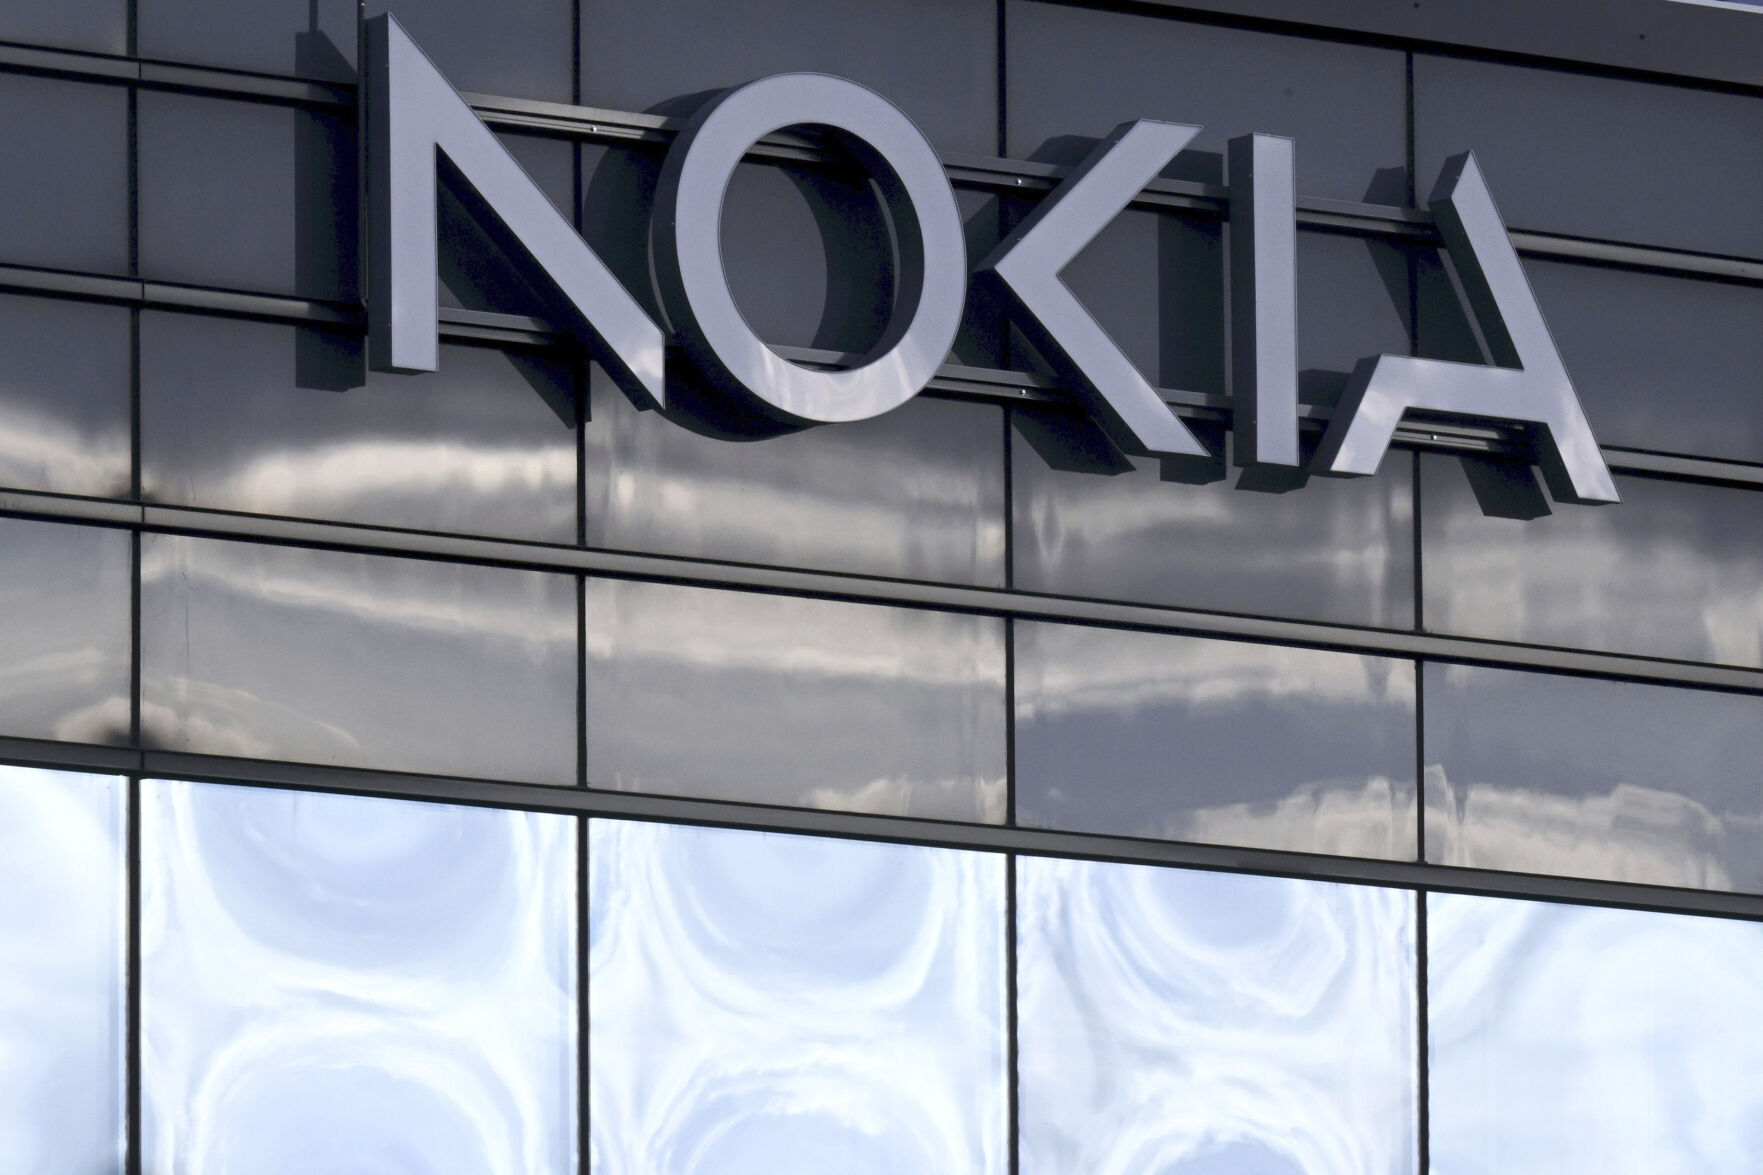 <p>A view of the Nokia headquarters in Espoo, Finland, Thursday, Oct. 19, 2023. Telecom gear maker Nokia said Thursday that it is planning to cut up to 14,000 jobs worldwide, or 16% of its workforce, as part of a push to reduce costs following a plunge in third-quarter sales and profit. The Finnish wireless and fixed-network equipment provider said the planned measures are aimed at reducing its cost base and increase operational efficiency “to navigate the current market uncertainty." (Jussi Nukari/Lehtikuva via AP)</p>   PHOTO CREDIT: Jussi Nukari